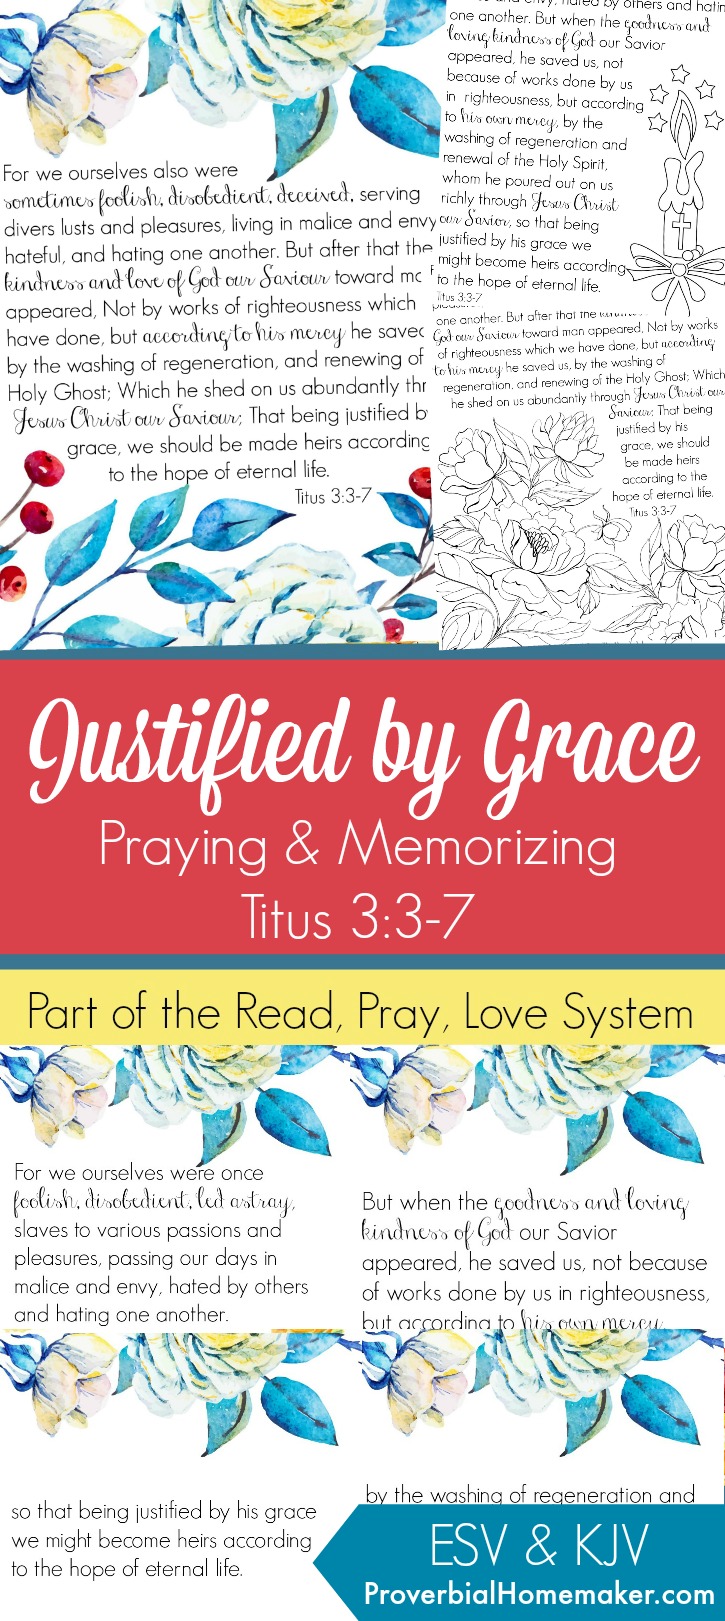 Pray and begin memorizing Titus3:3-7 together as a family,. These beautiful scripture art prints, memory verse cards, coloring pages, and prayer prompts are a wonderful way to get started. Part of the Proverbial Homemaker Read, Pray, Love system. 